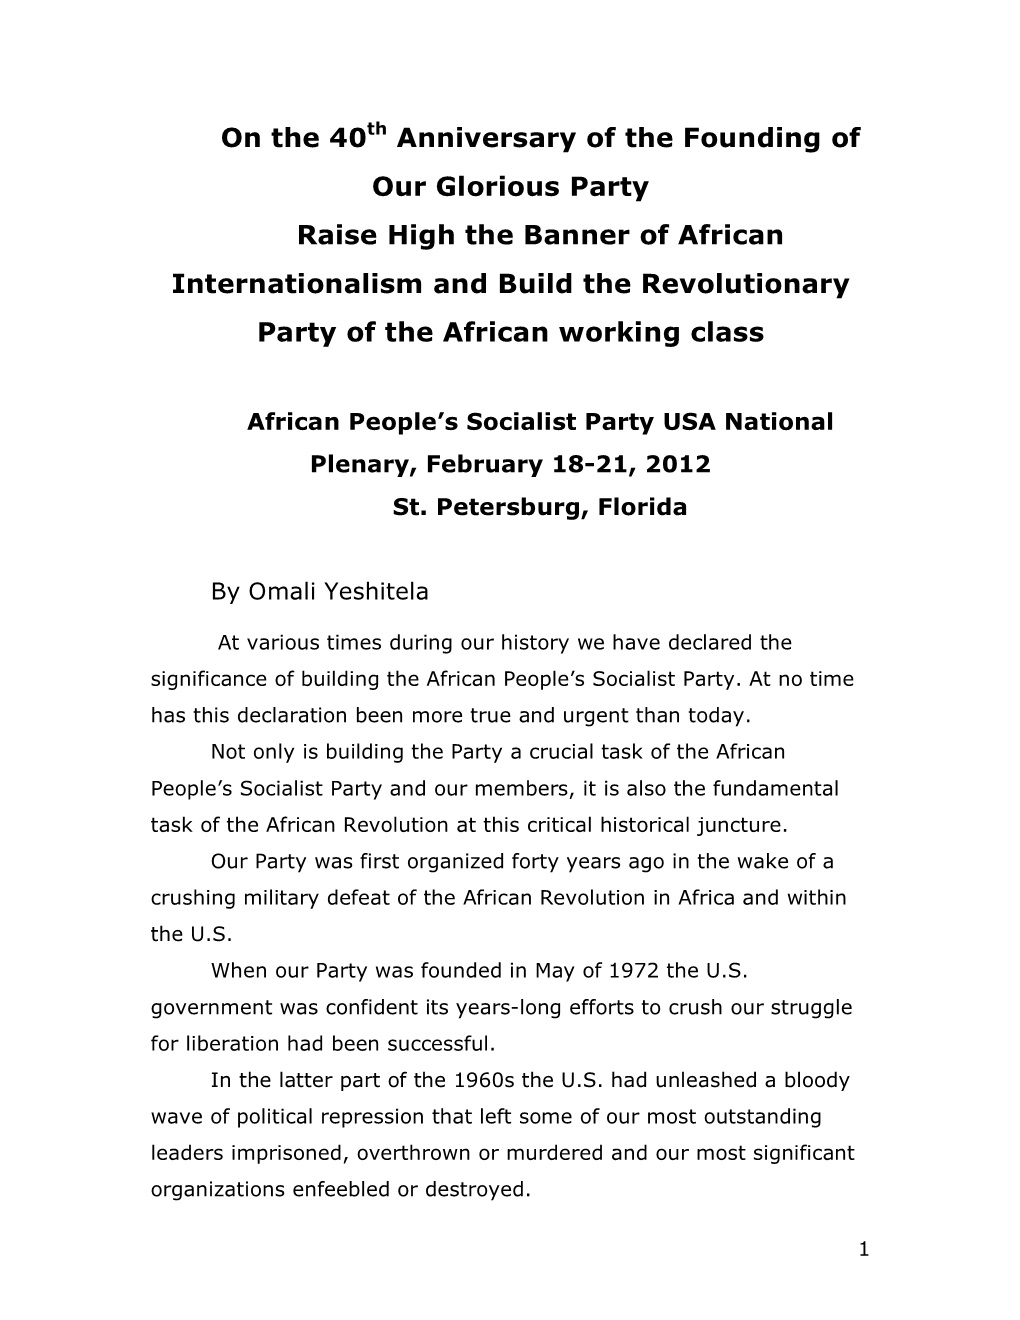 On the 40Th Anniversary of the Founding of Our Glorious Party Raise High the Banner of African Internationalism and Build the R